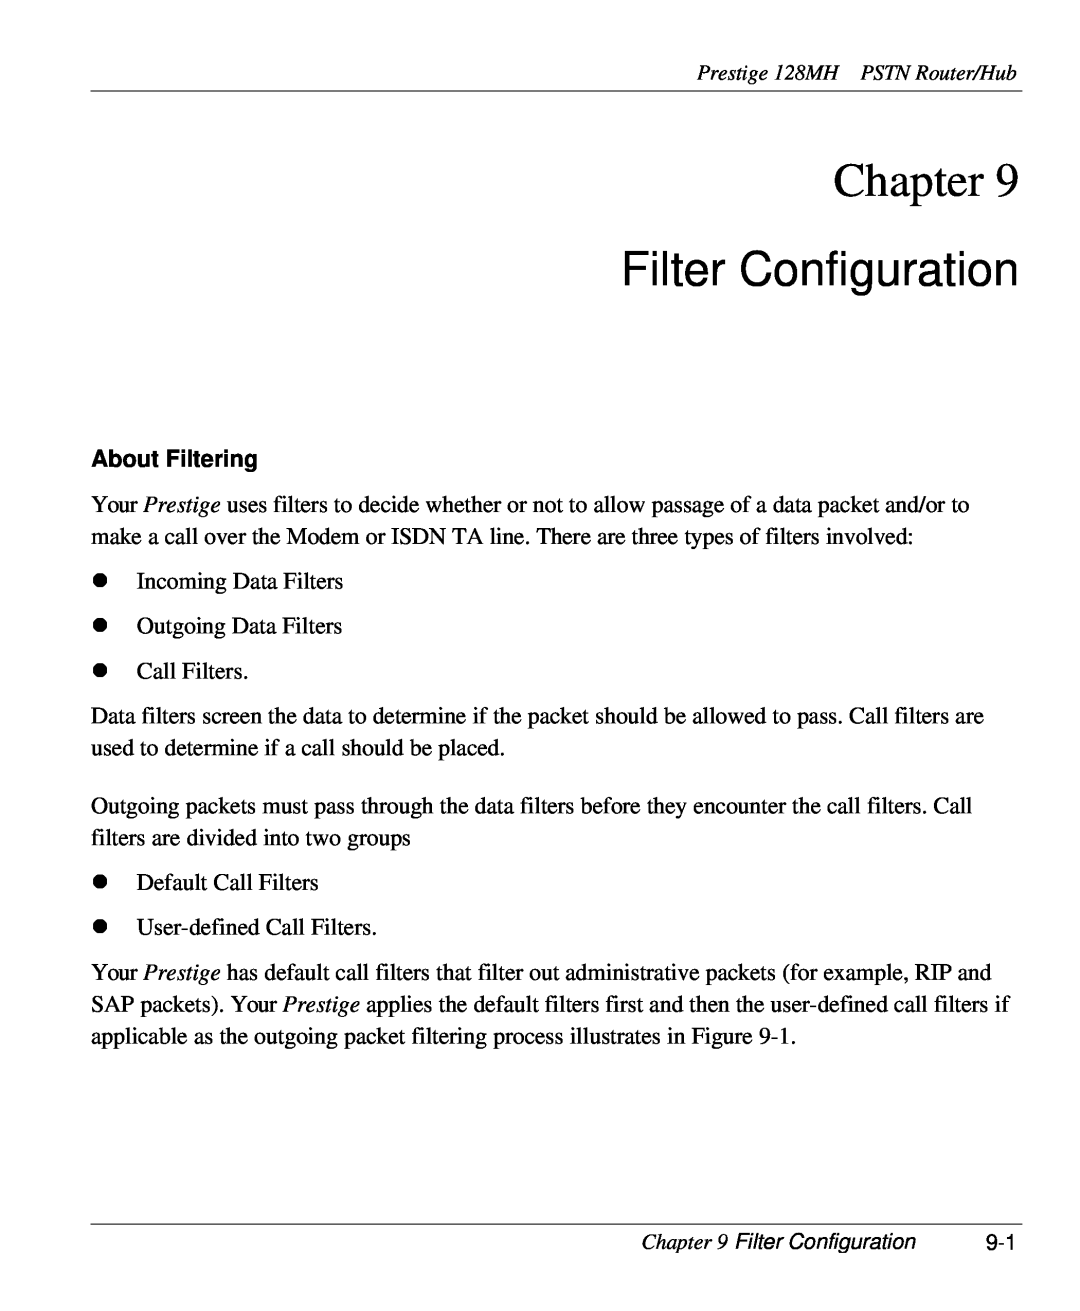 ZyXEL Communications 128MH user manual Filter Configuration, About Filtering, Chapter 